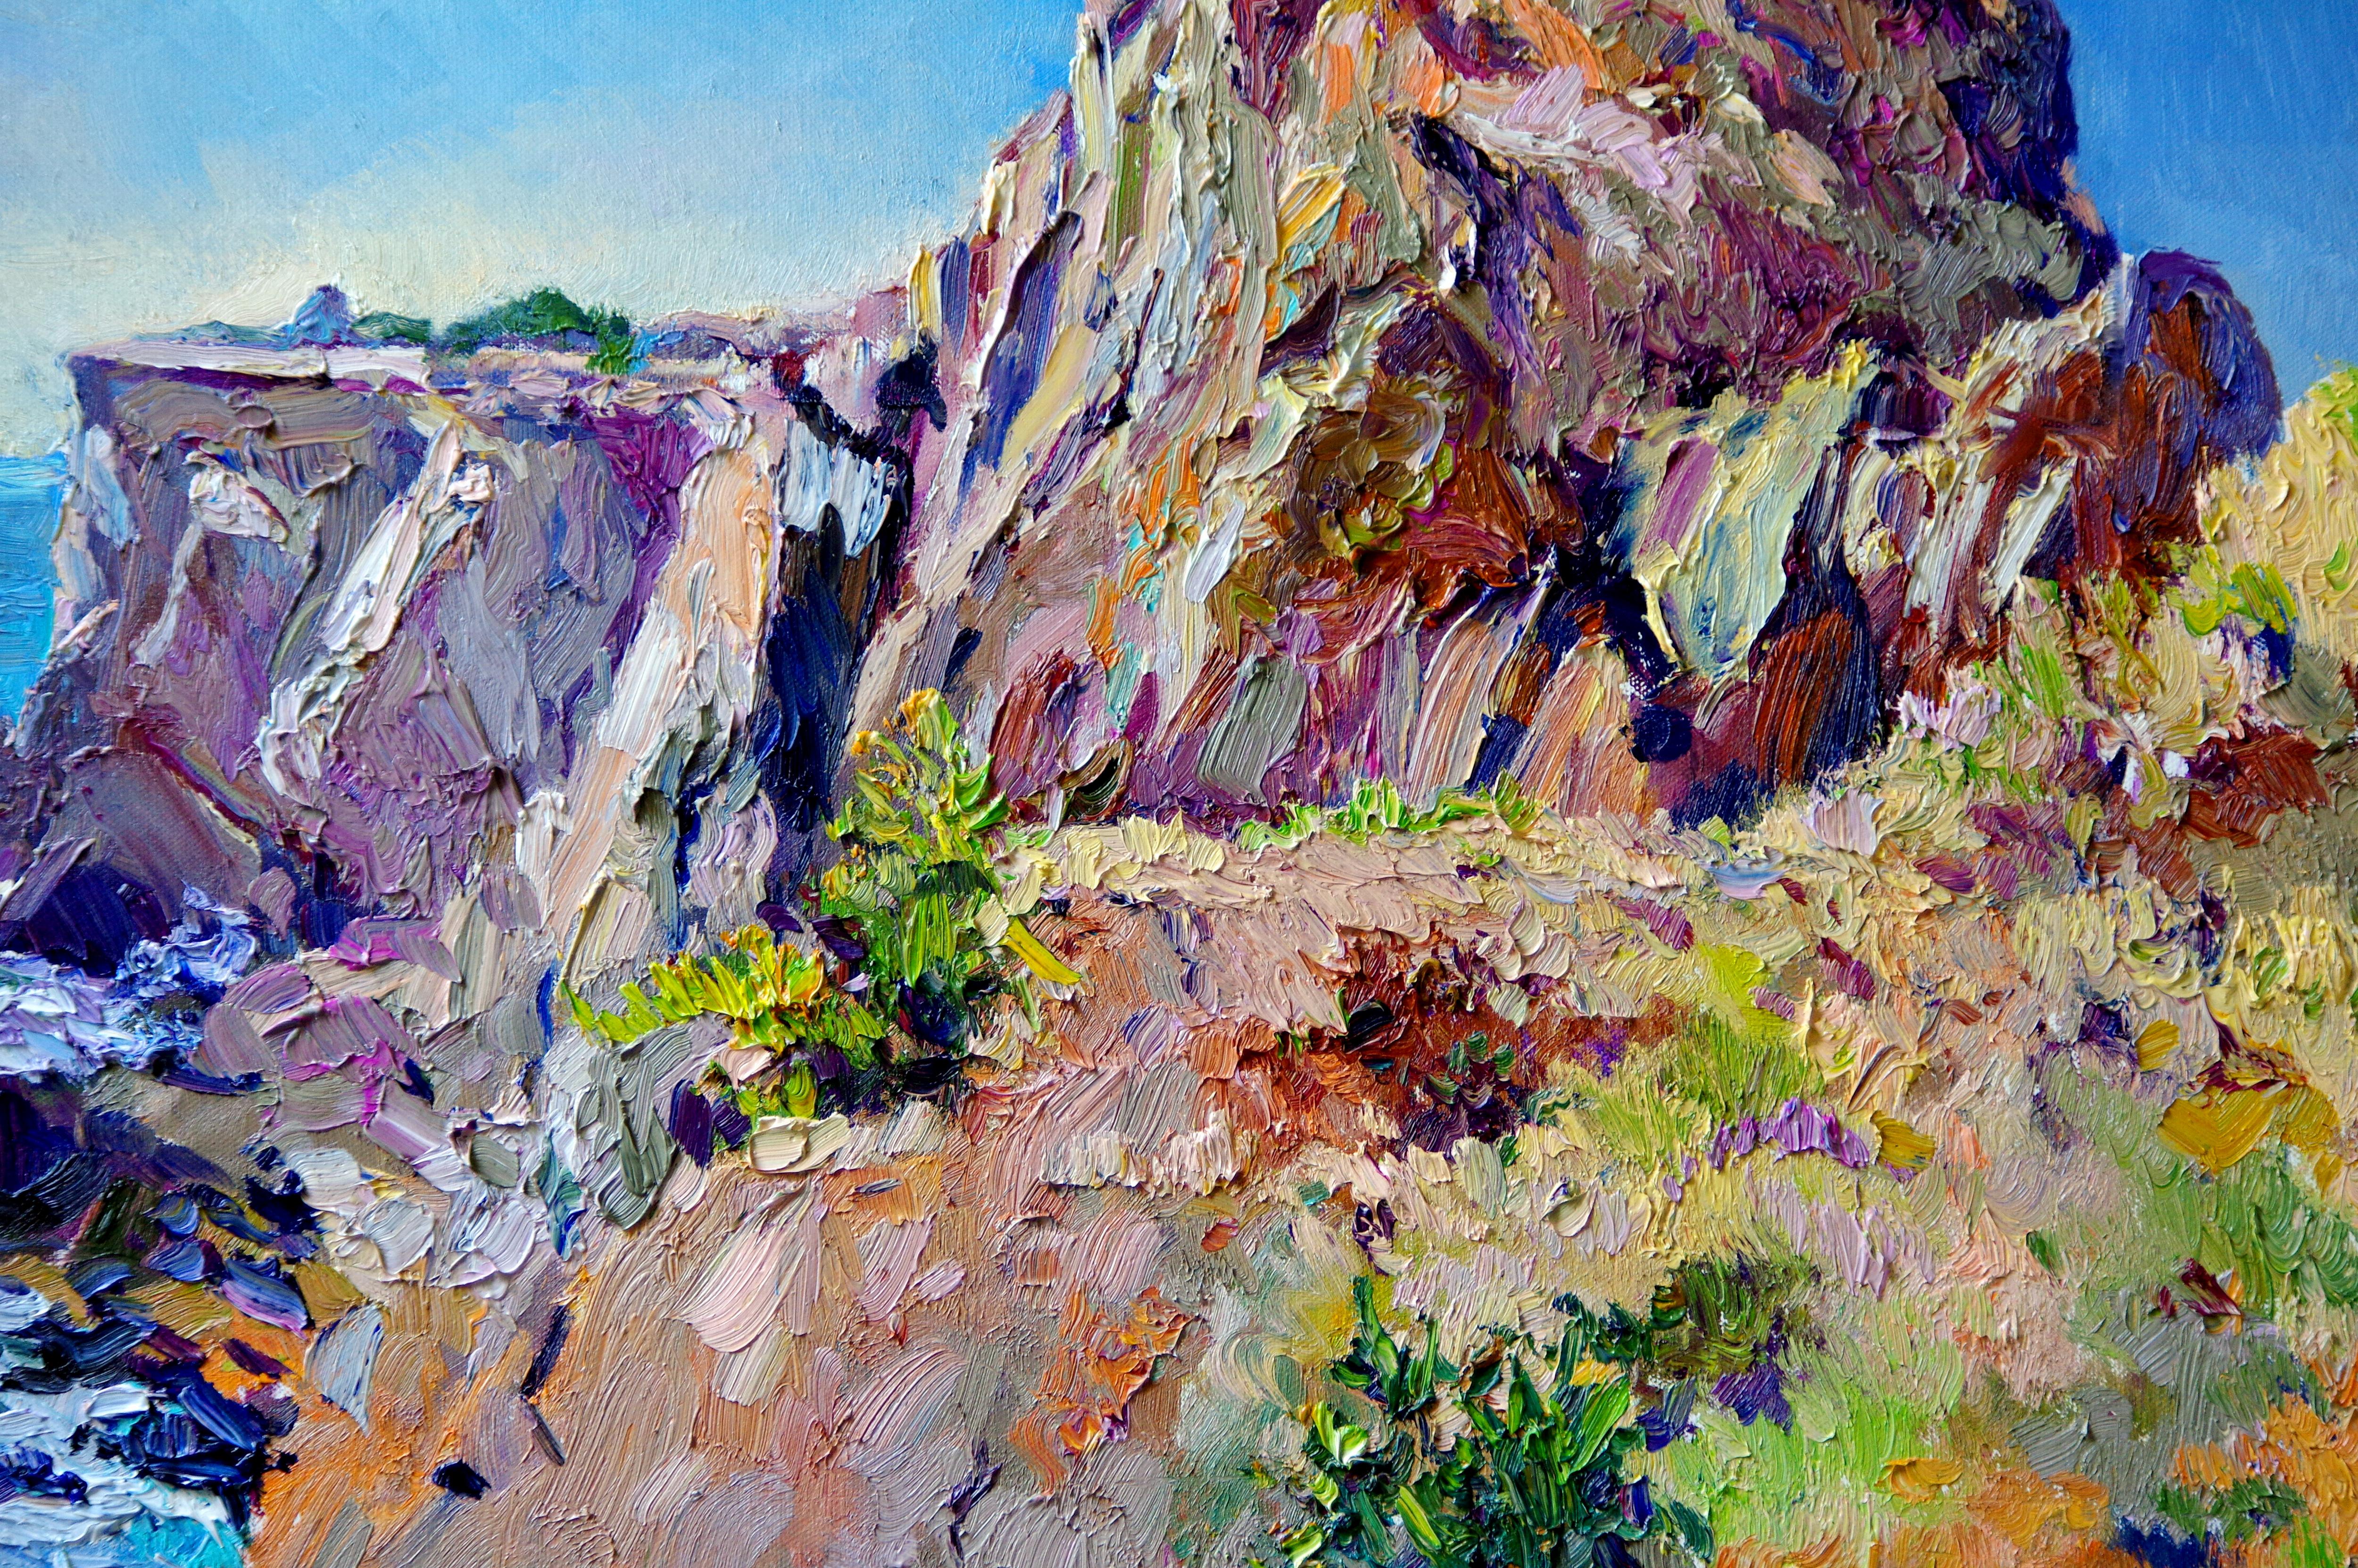 <p>Artist Comments<br />Bight, midday light on a giant outcropping in Malibu, California. Strong shades of purple, orange and green mix together in the rock and stand against the delicate blue sky. Thick textured adds weight and presence to the